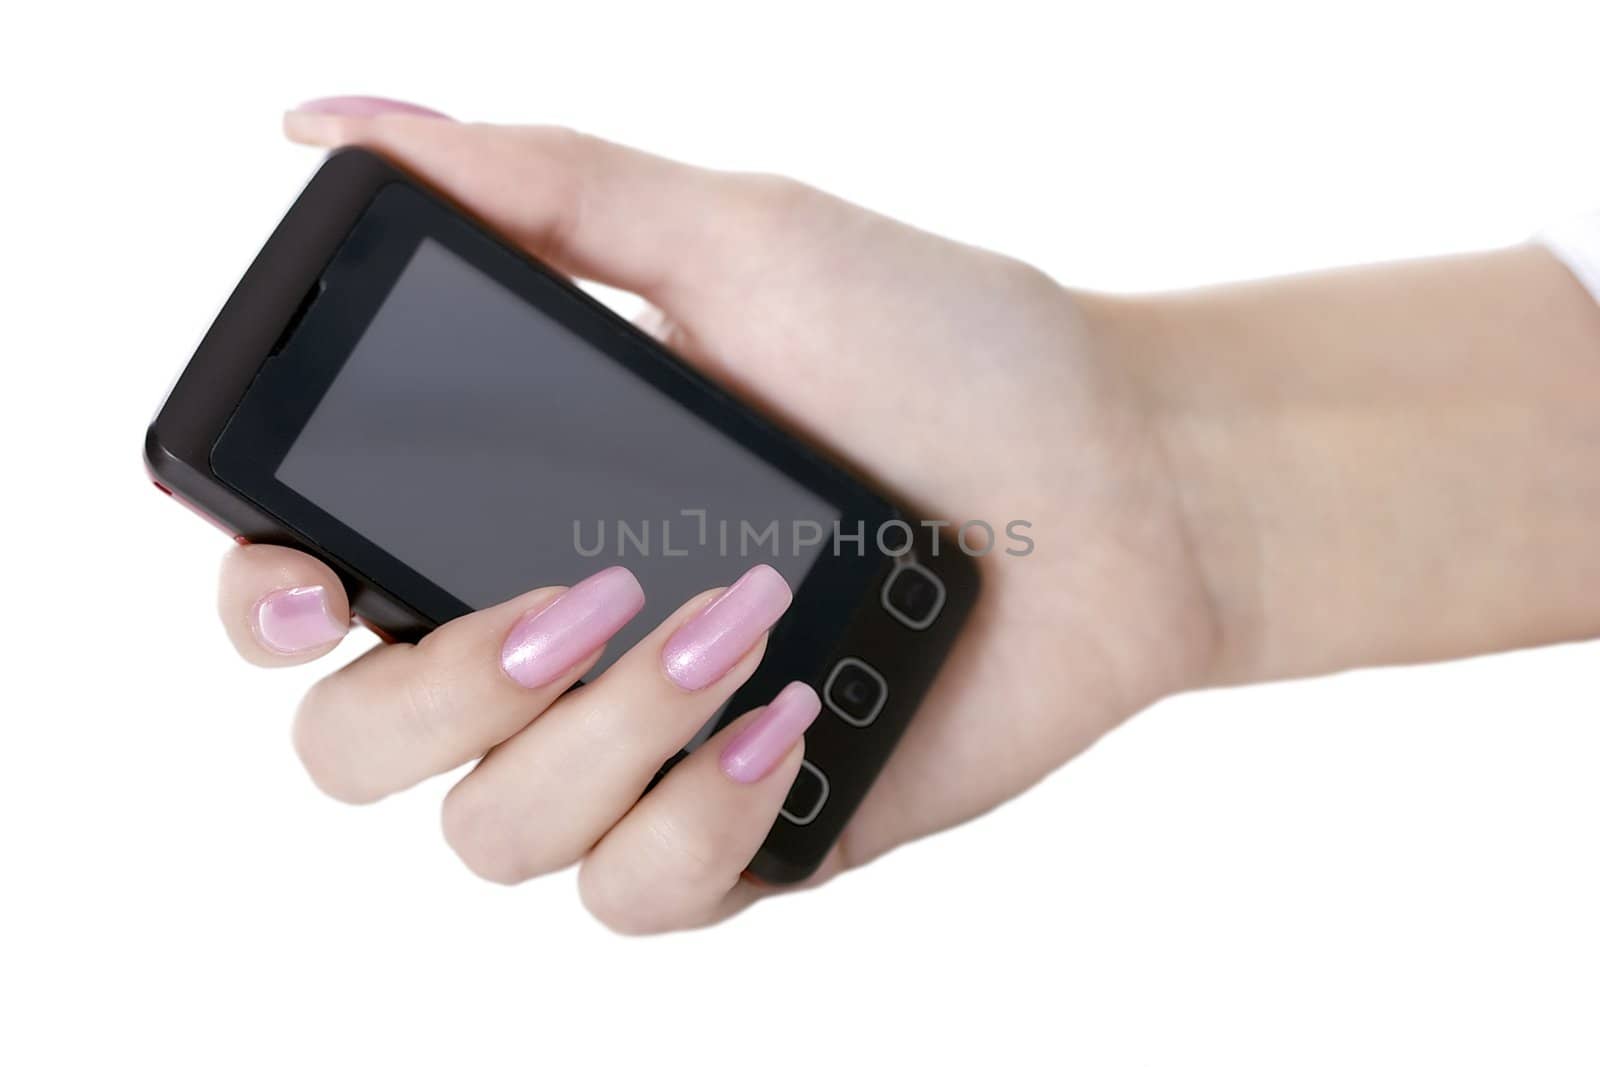 The female hand holds a mobile phone